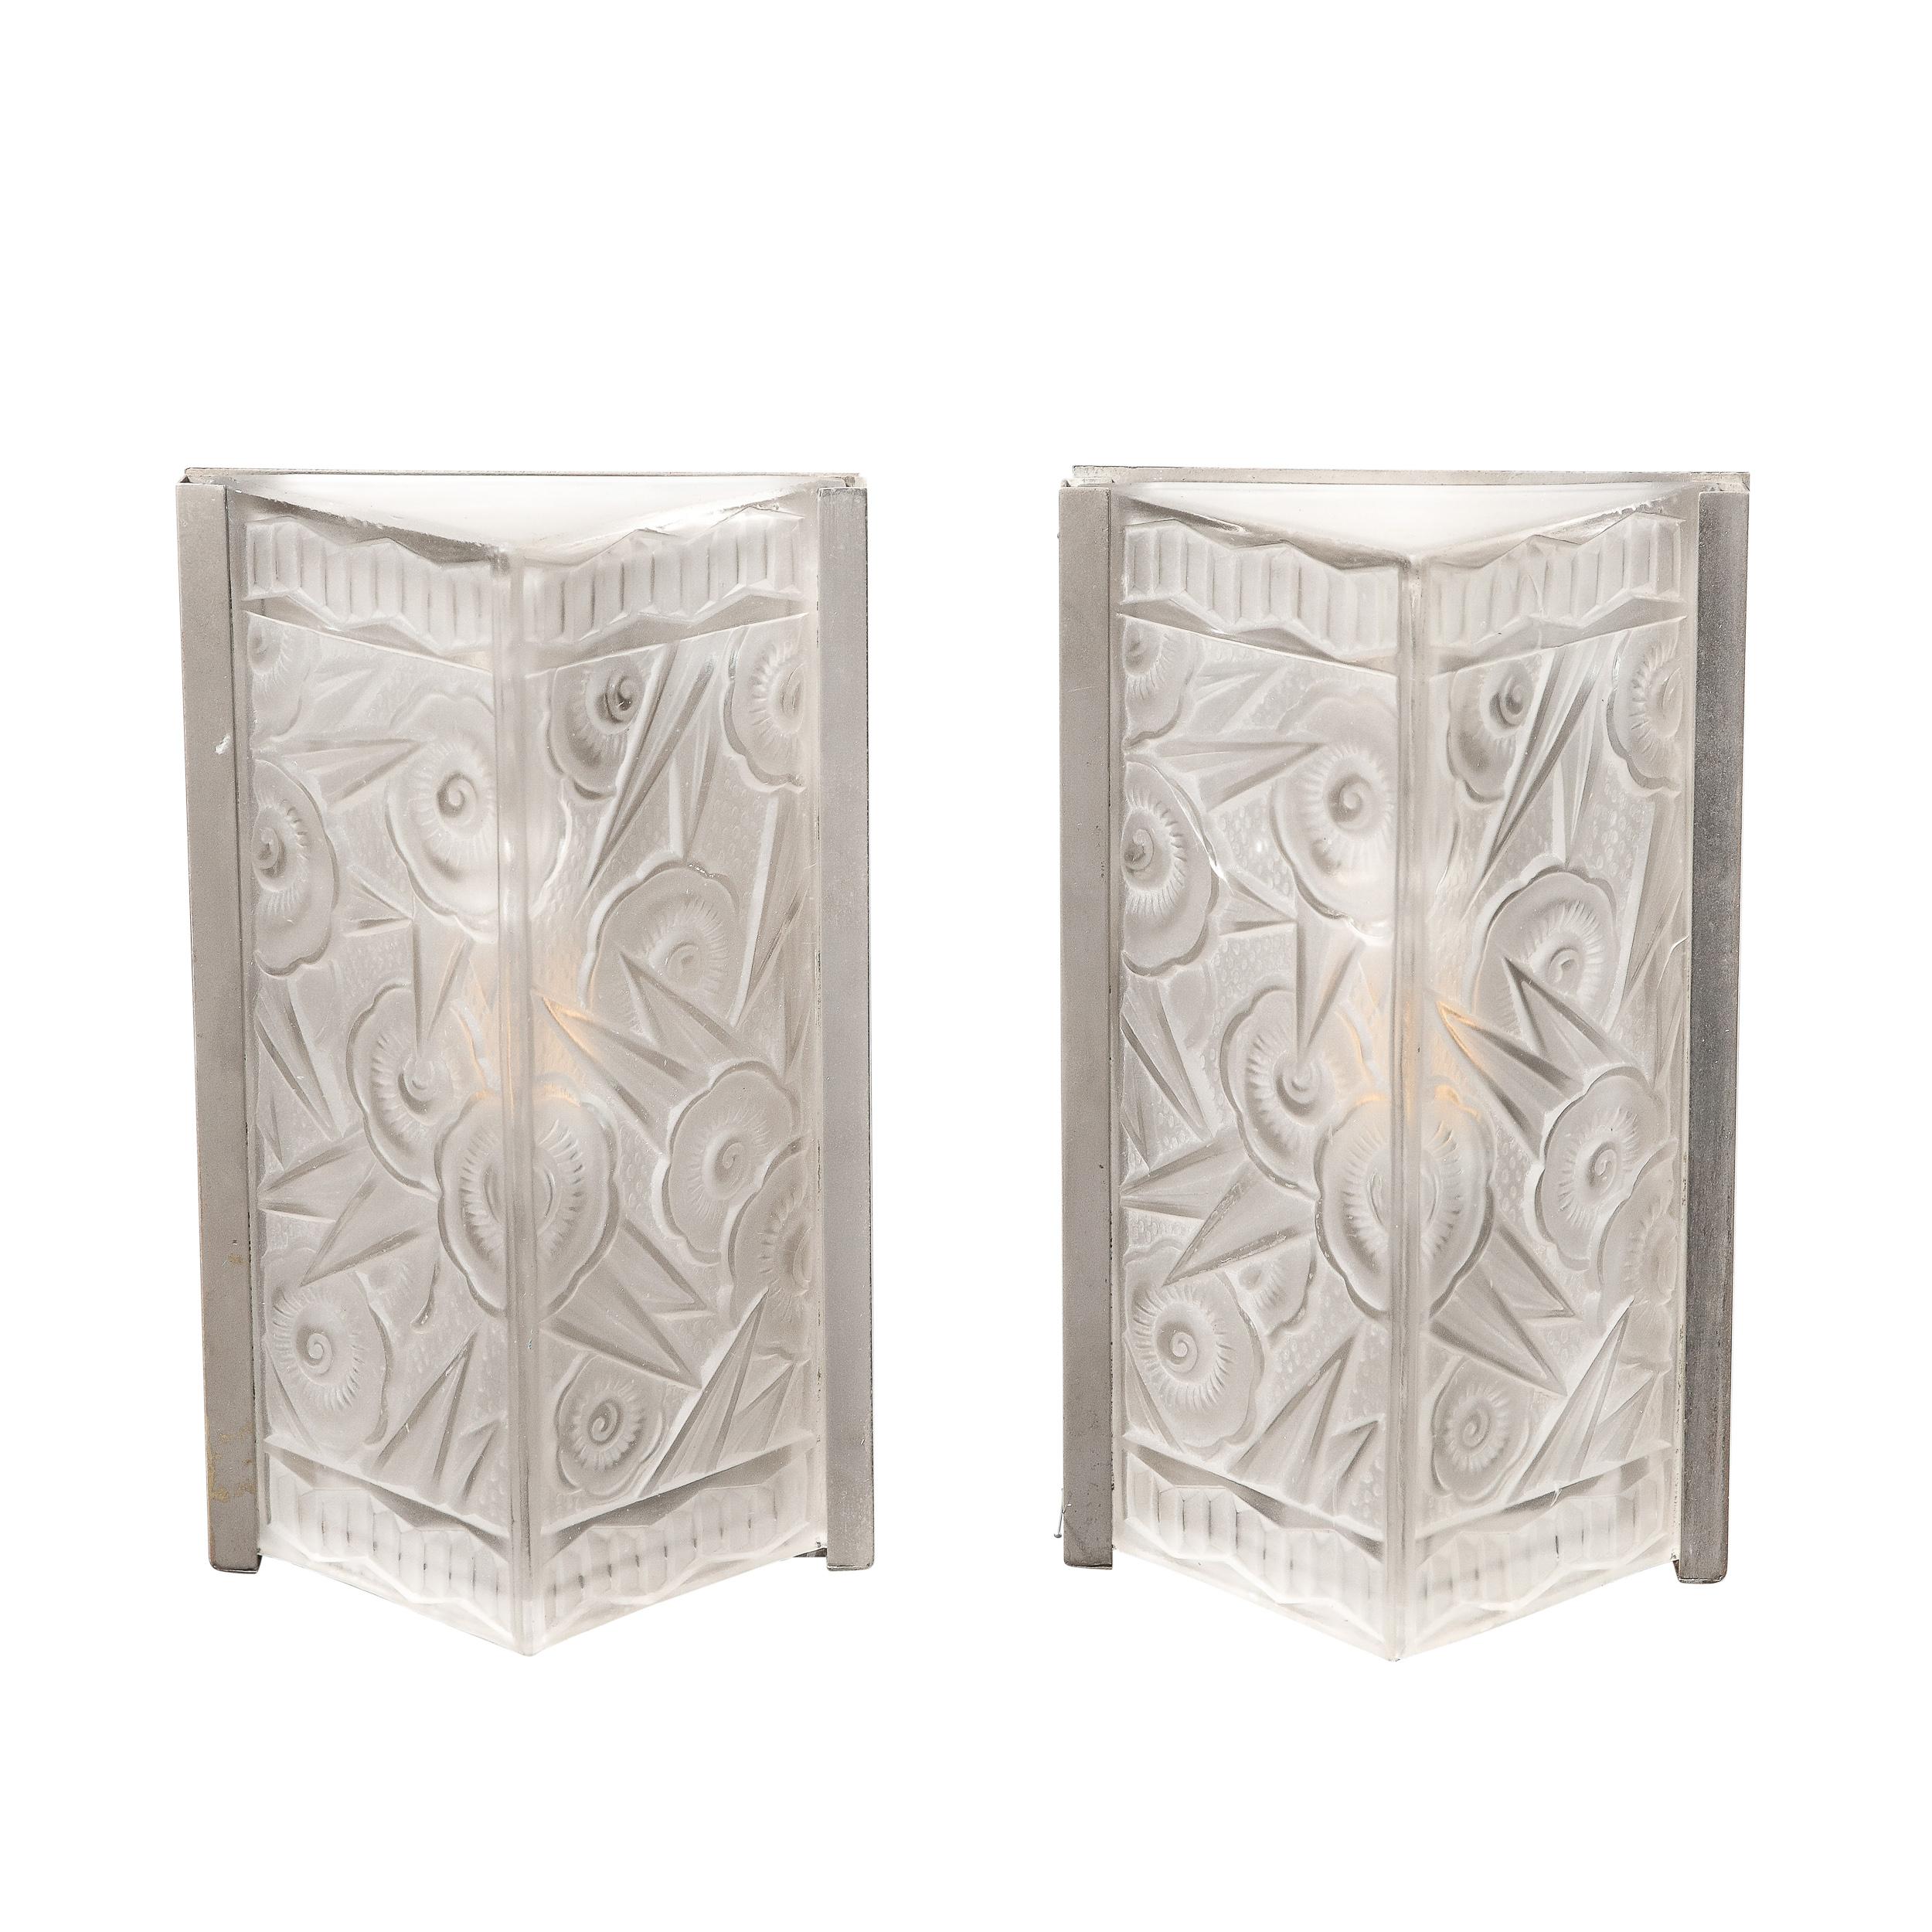 This refined pair of Art Deco Molded and Frosted Glass Sconces originate from France, Circa 1930. They feature subtle frames in nickel that house shades in the form of trainagular prisms. The frosted glass serves to diffuse light with an alluring